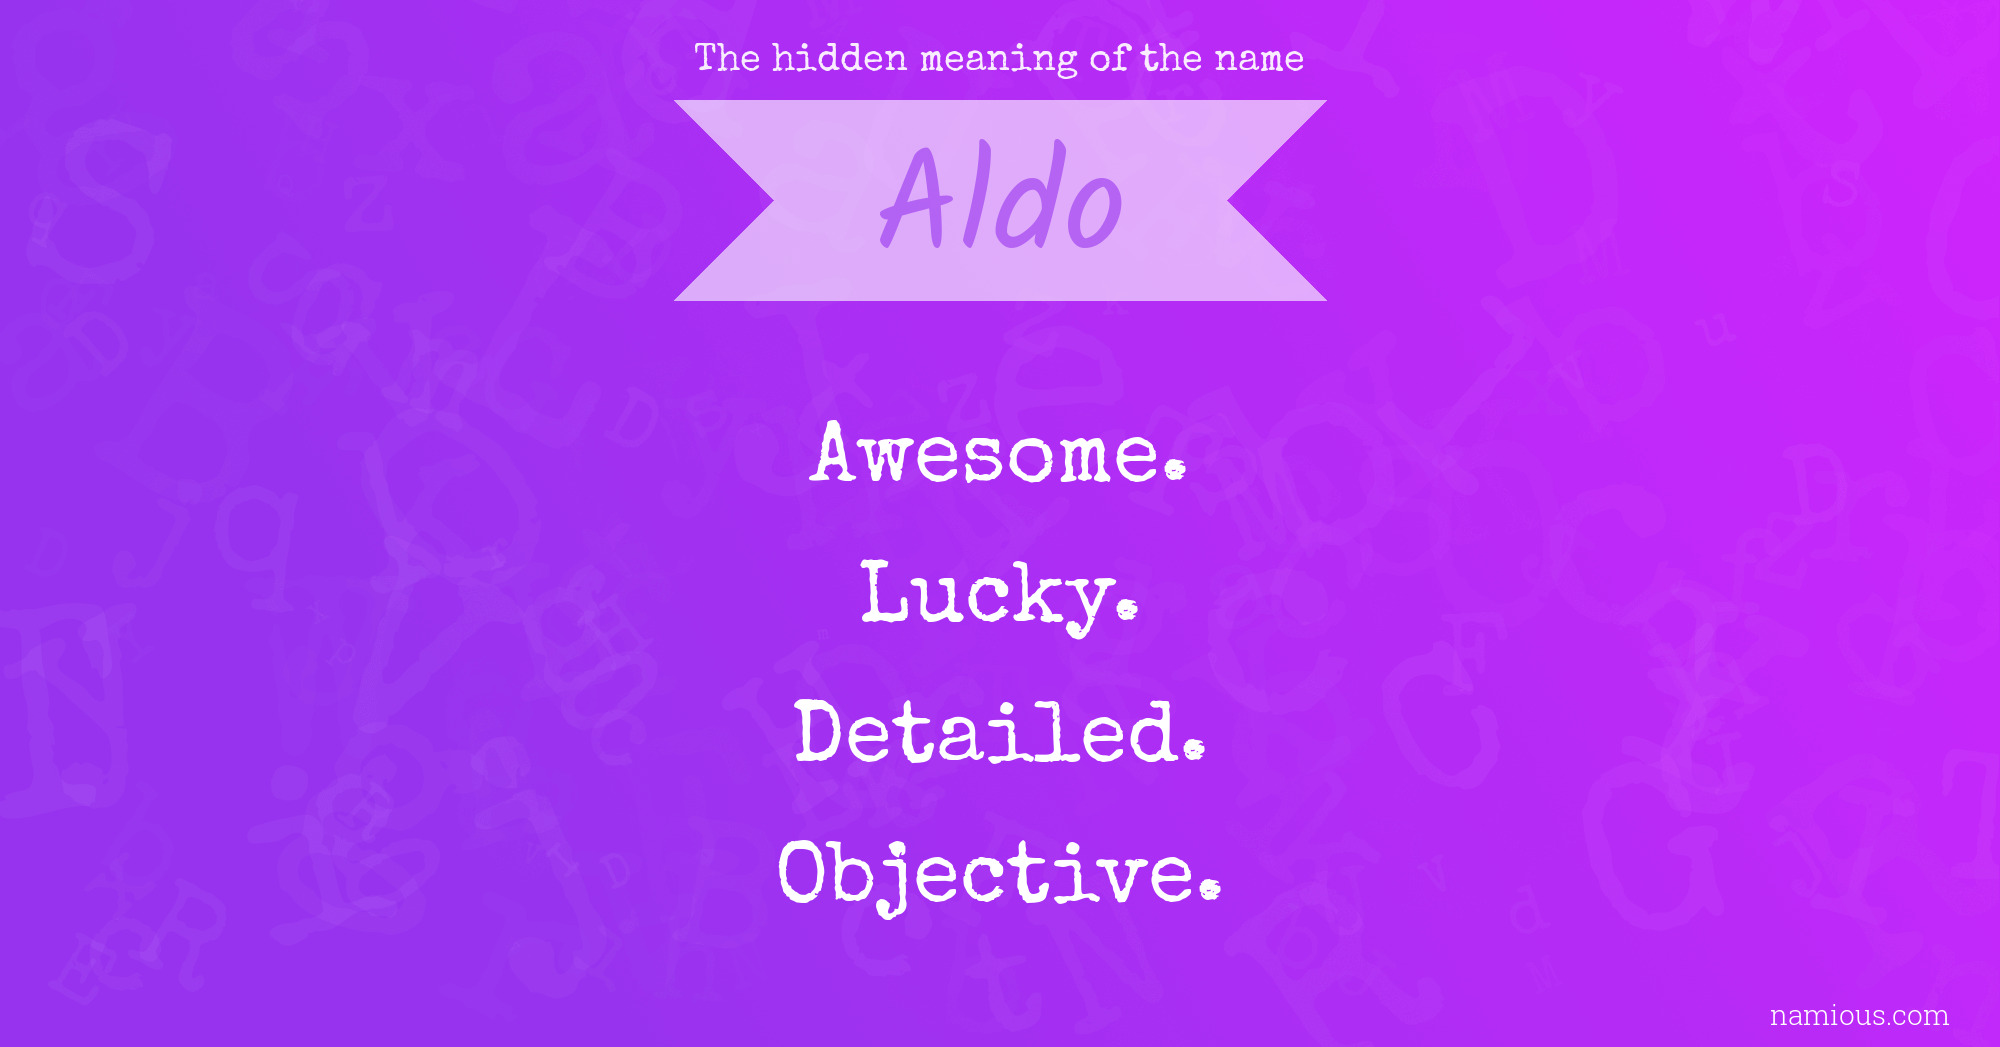 The hidden meaning of the name Aldo